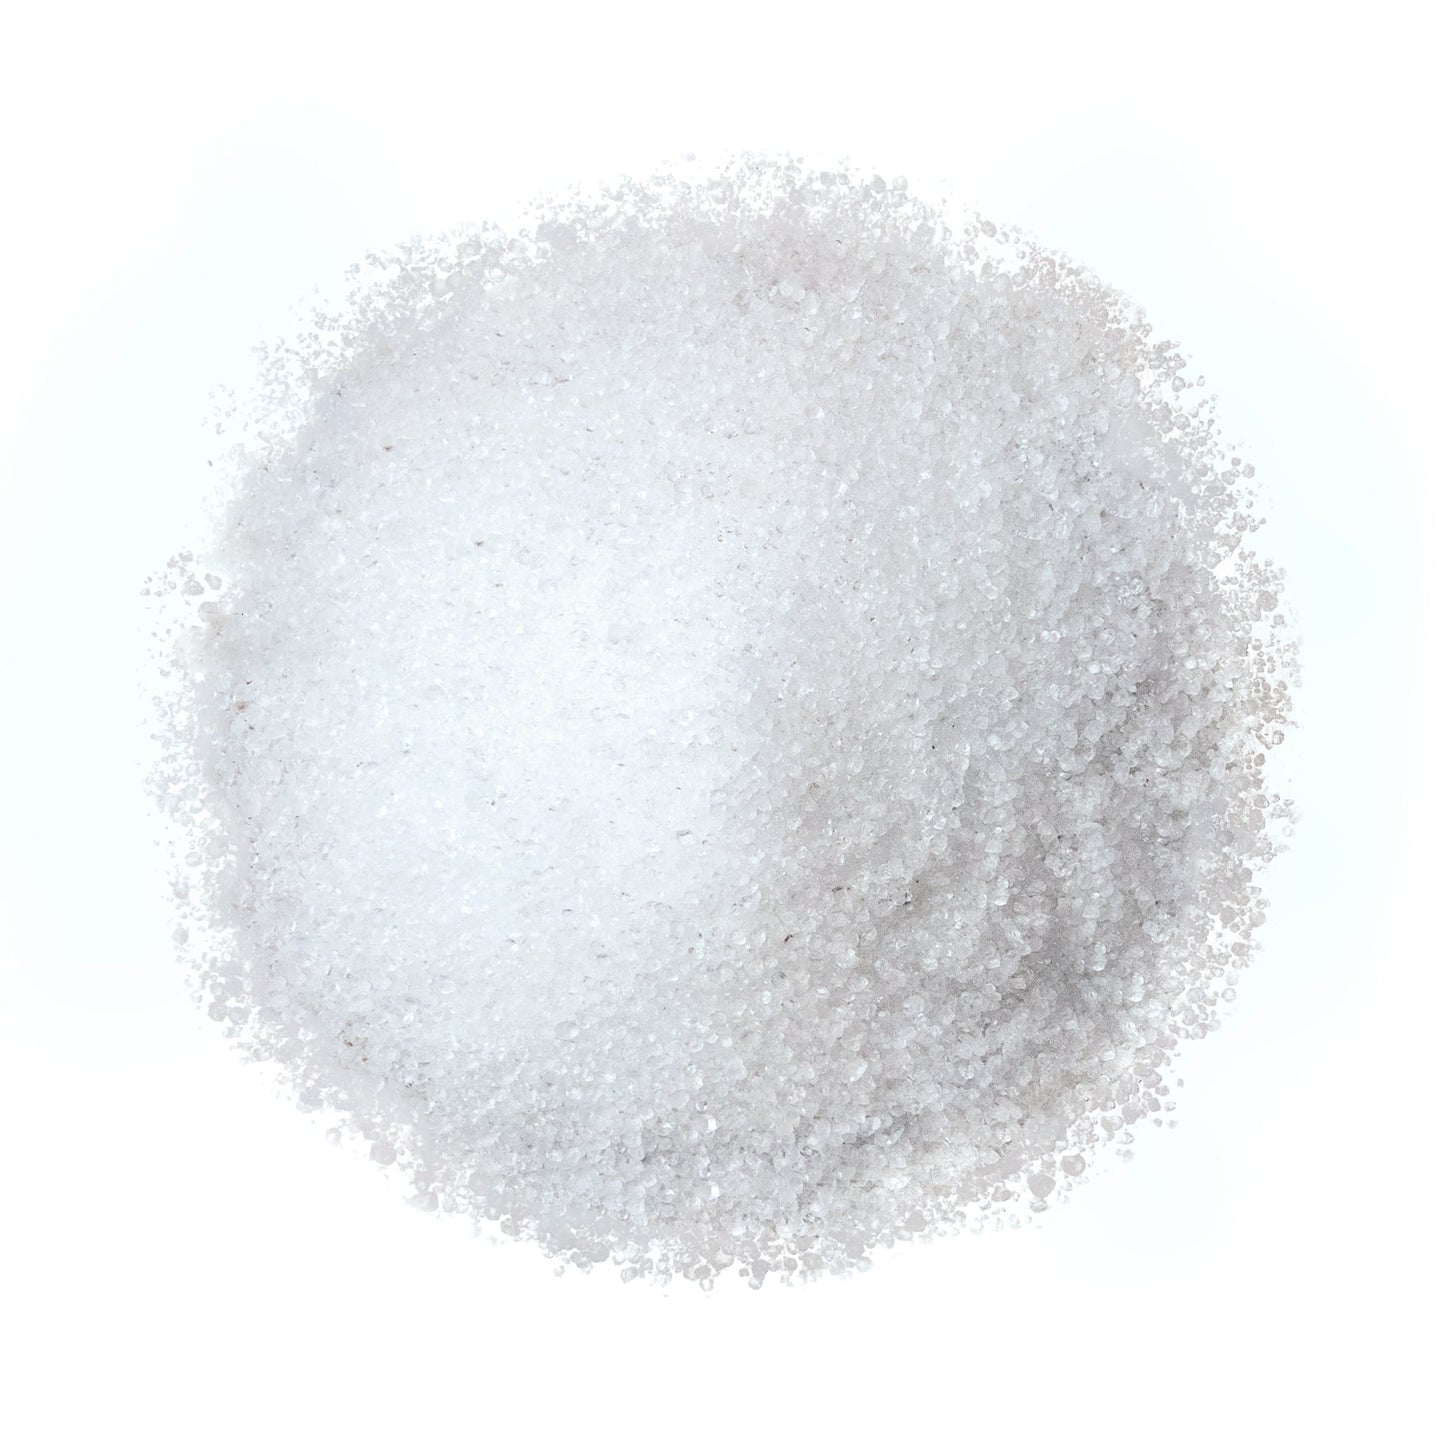 Citric Acid Powder — Anhydrous, Fine Granules, Food Grade Lemon Salt, Great for Cheese Making and Bath Bombs, Kosher, Bulk -by Food to Live